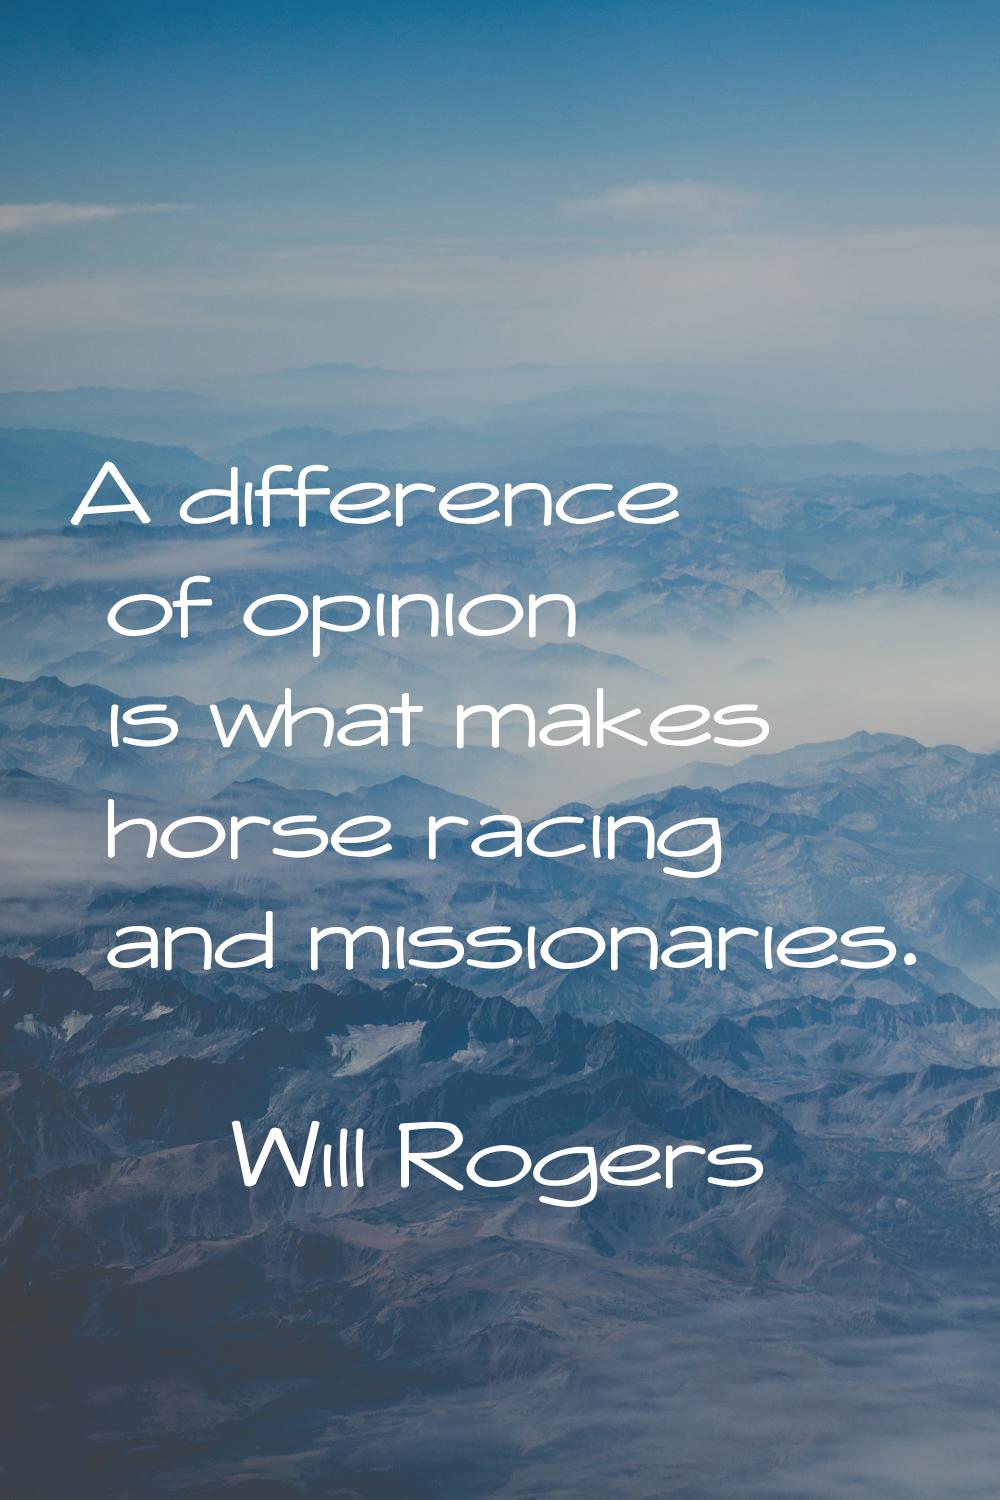 A difference of opinion is what makes horse racing and missionaries.